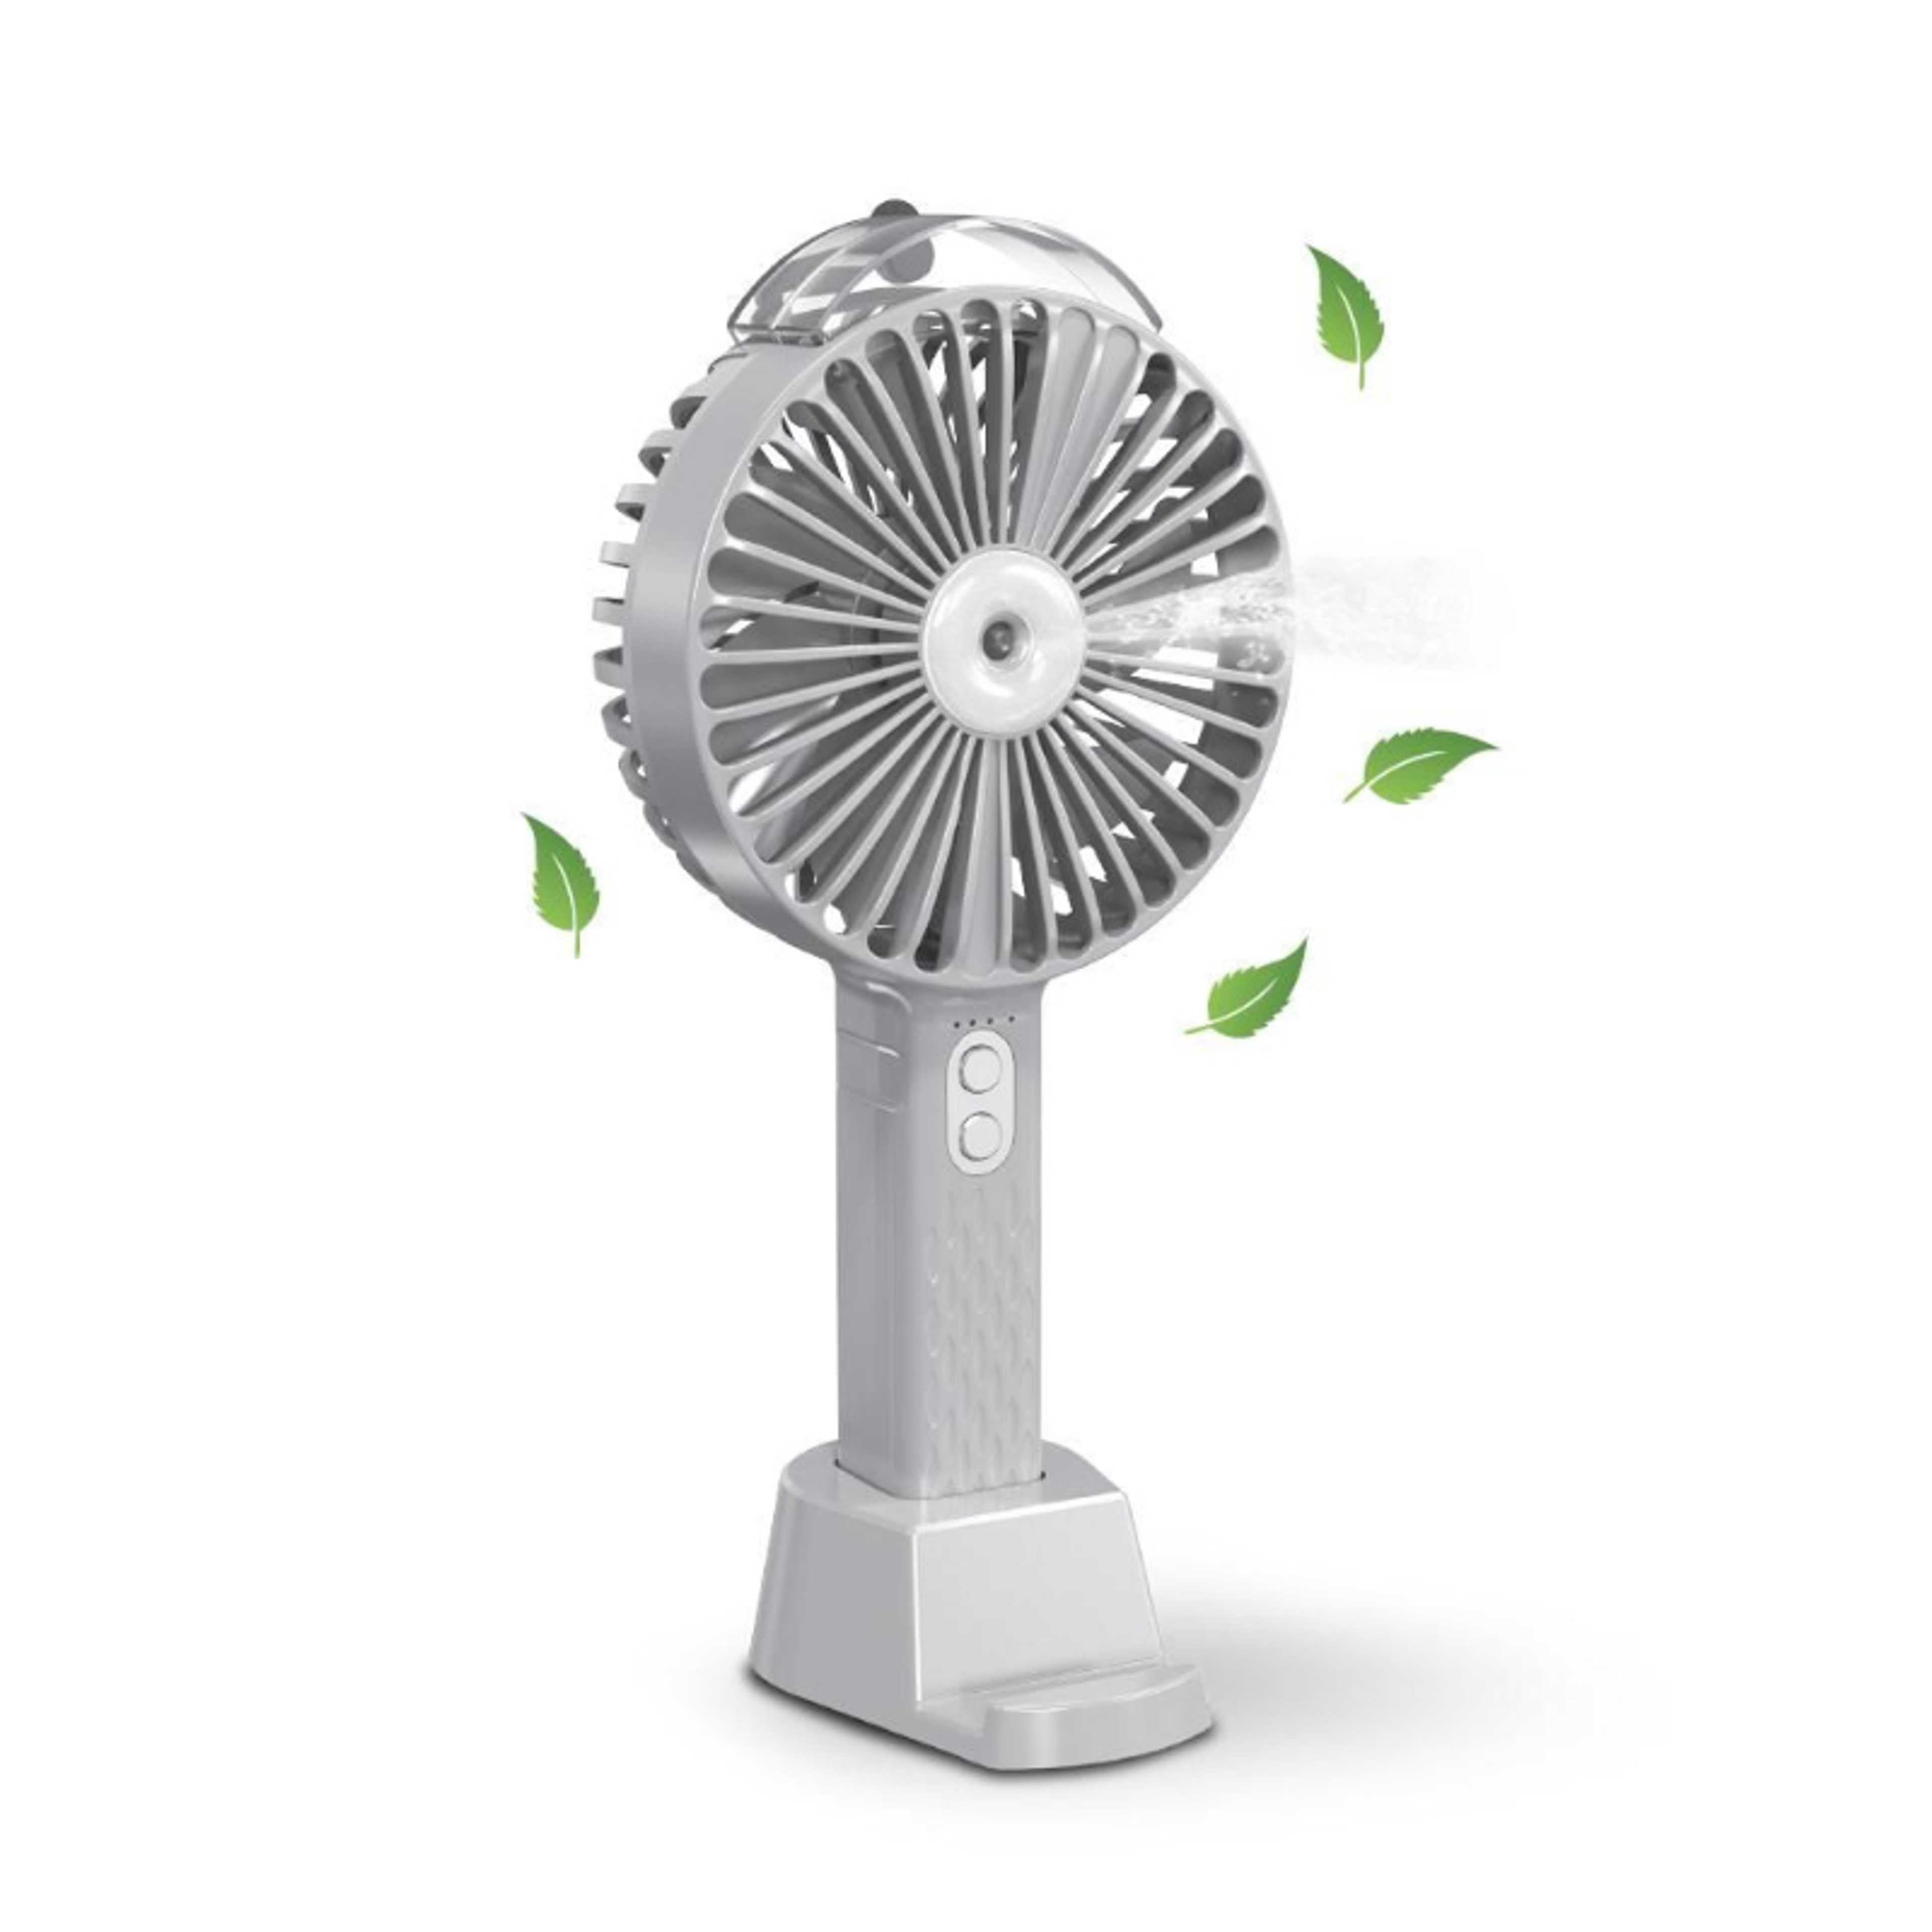 Aircool water spray portable chargeable fan with removeable base